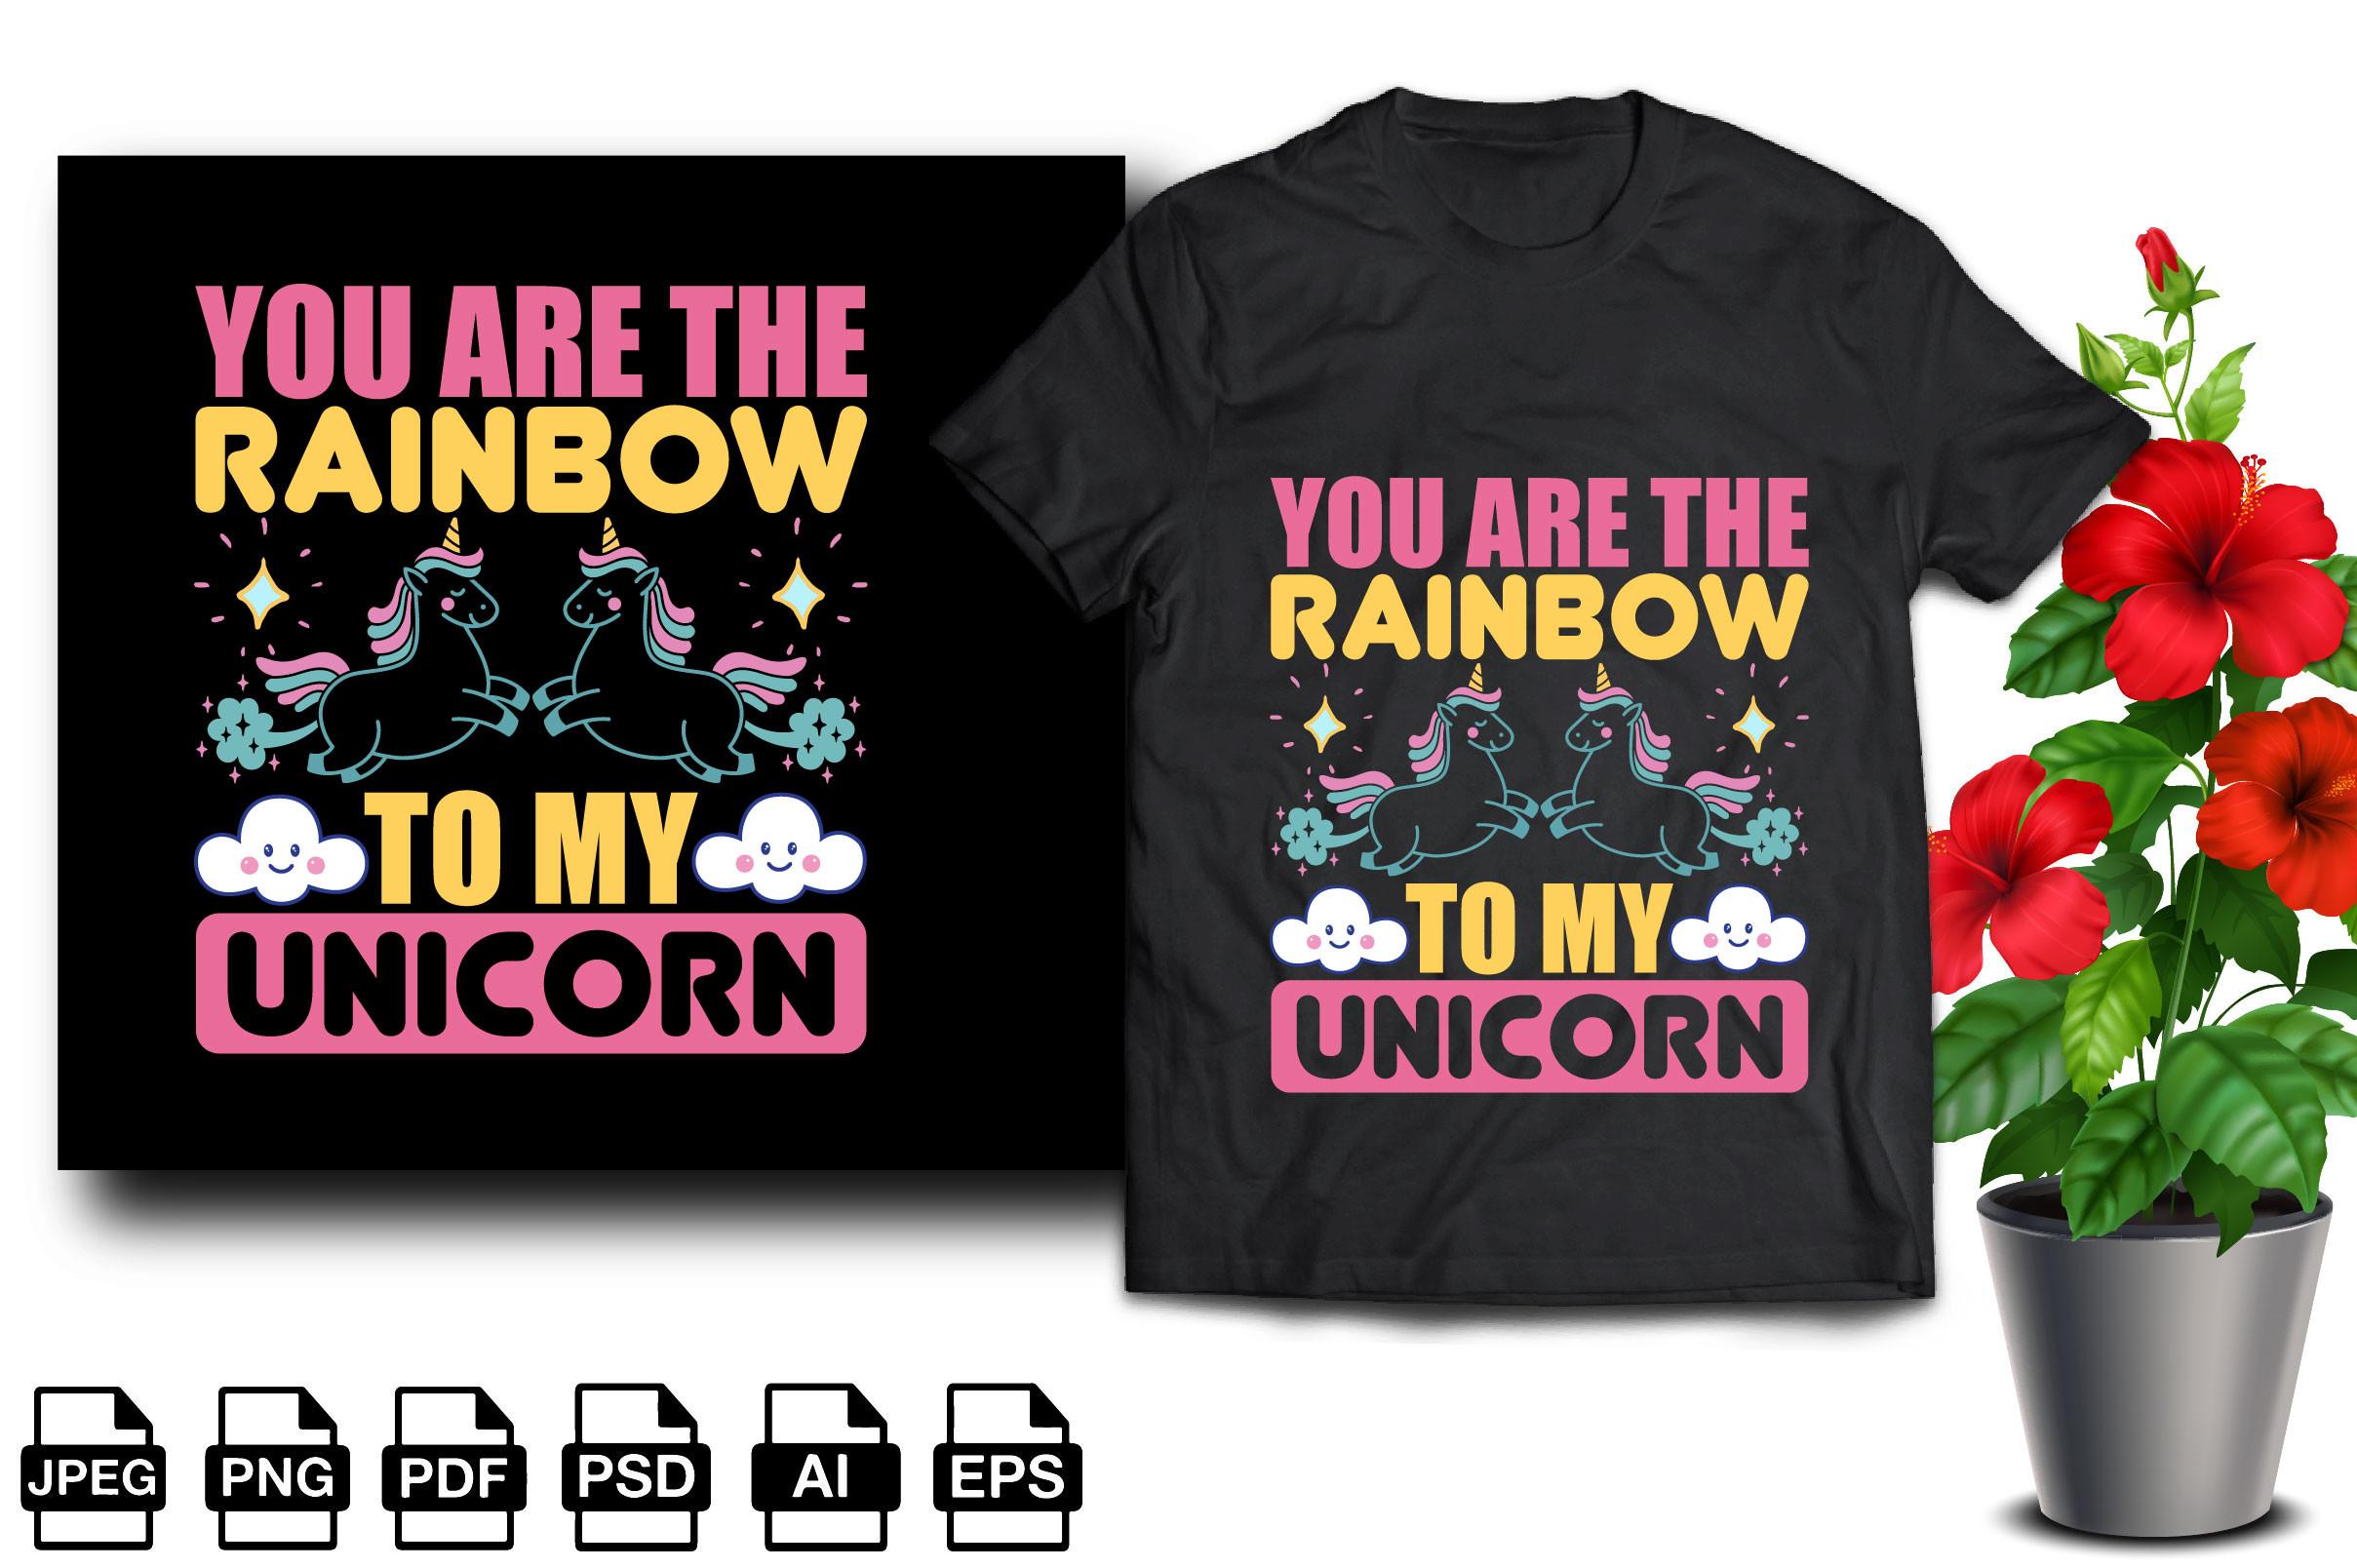 You Are the Rainbow to My Unicorn